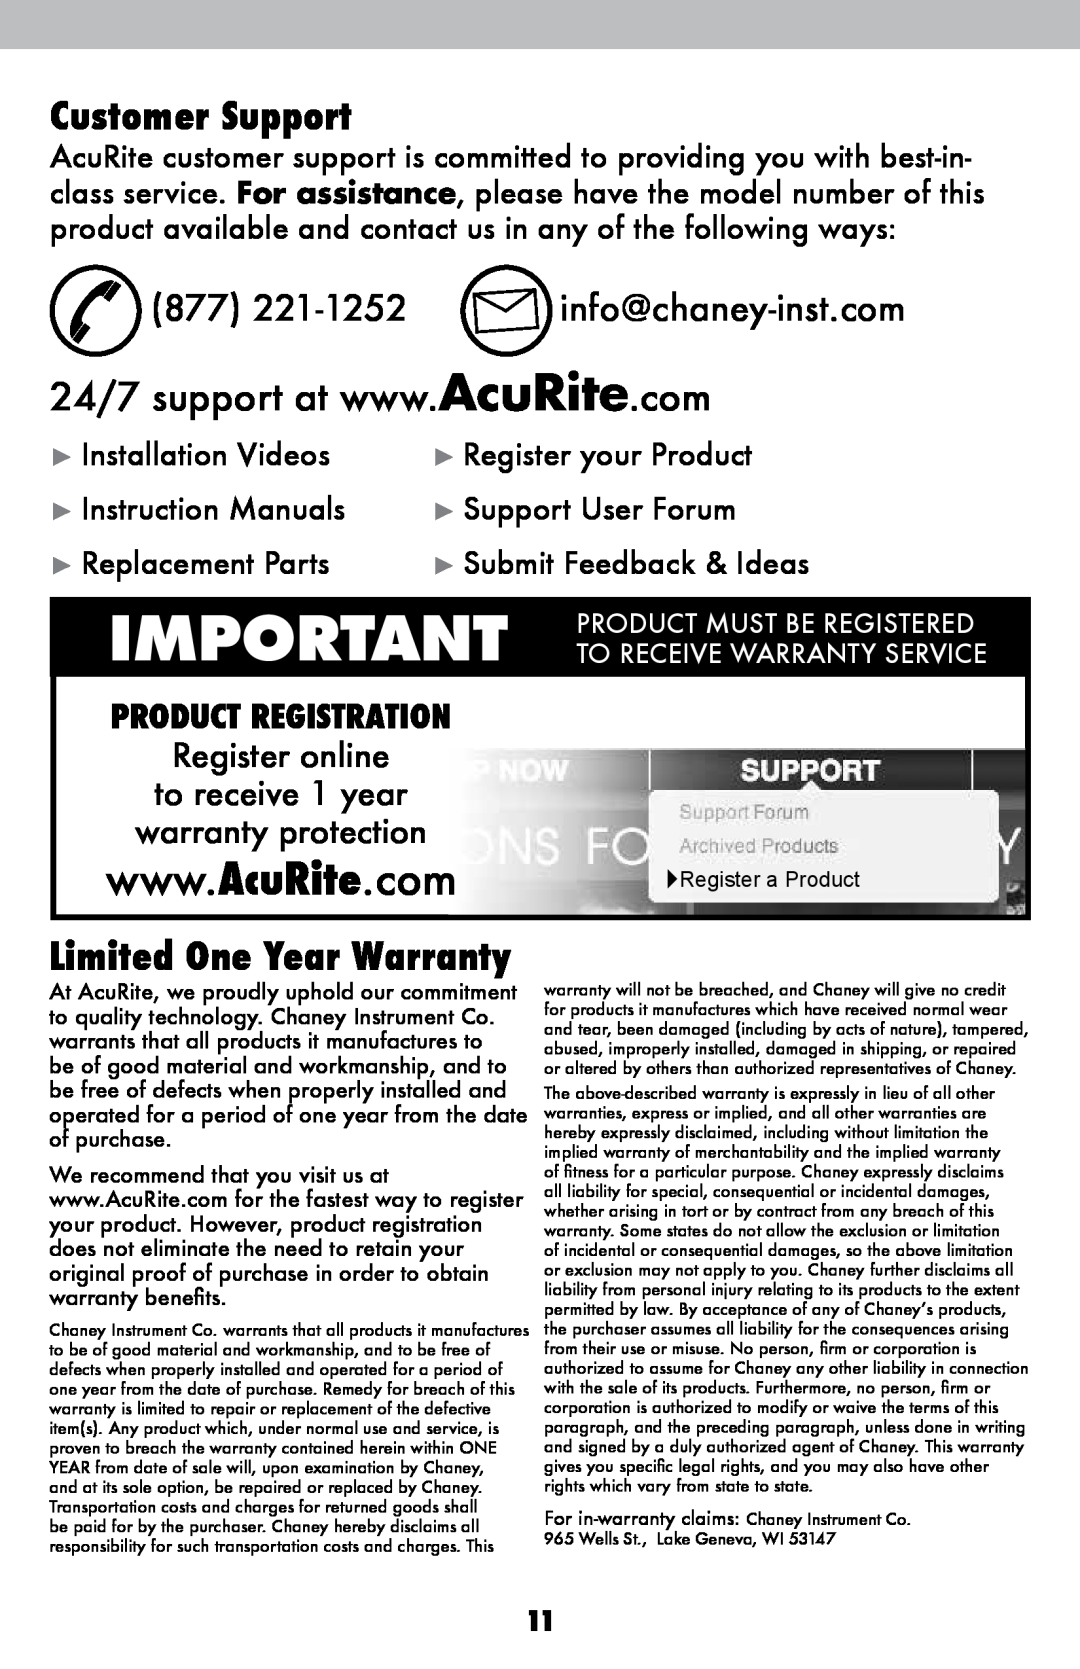 Acu-Rite 00774W, 754 Customer Support, 877 221-1252 info@chaney-inst.com, Limited One Year Warranty, Register online 